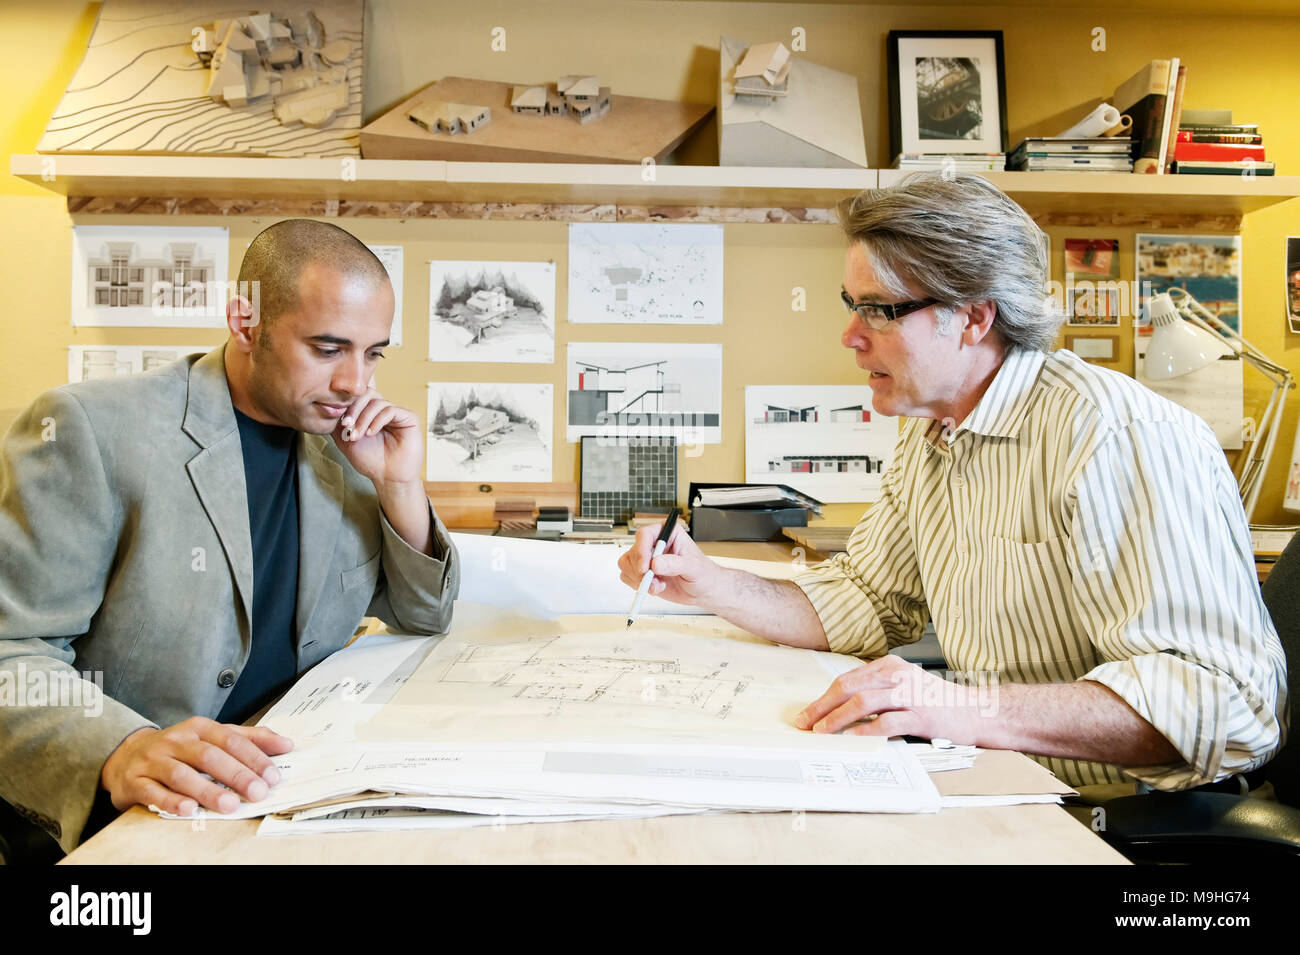 A multi-ethnic team of two male architects working on plans for a new home in an architect's office. Stock Photo